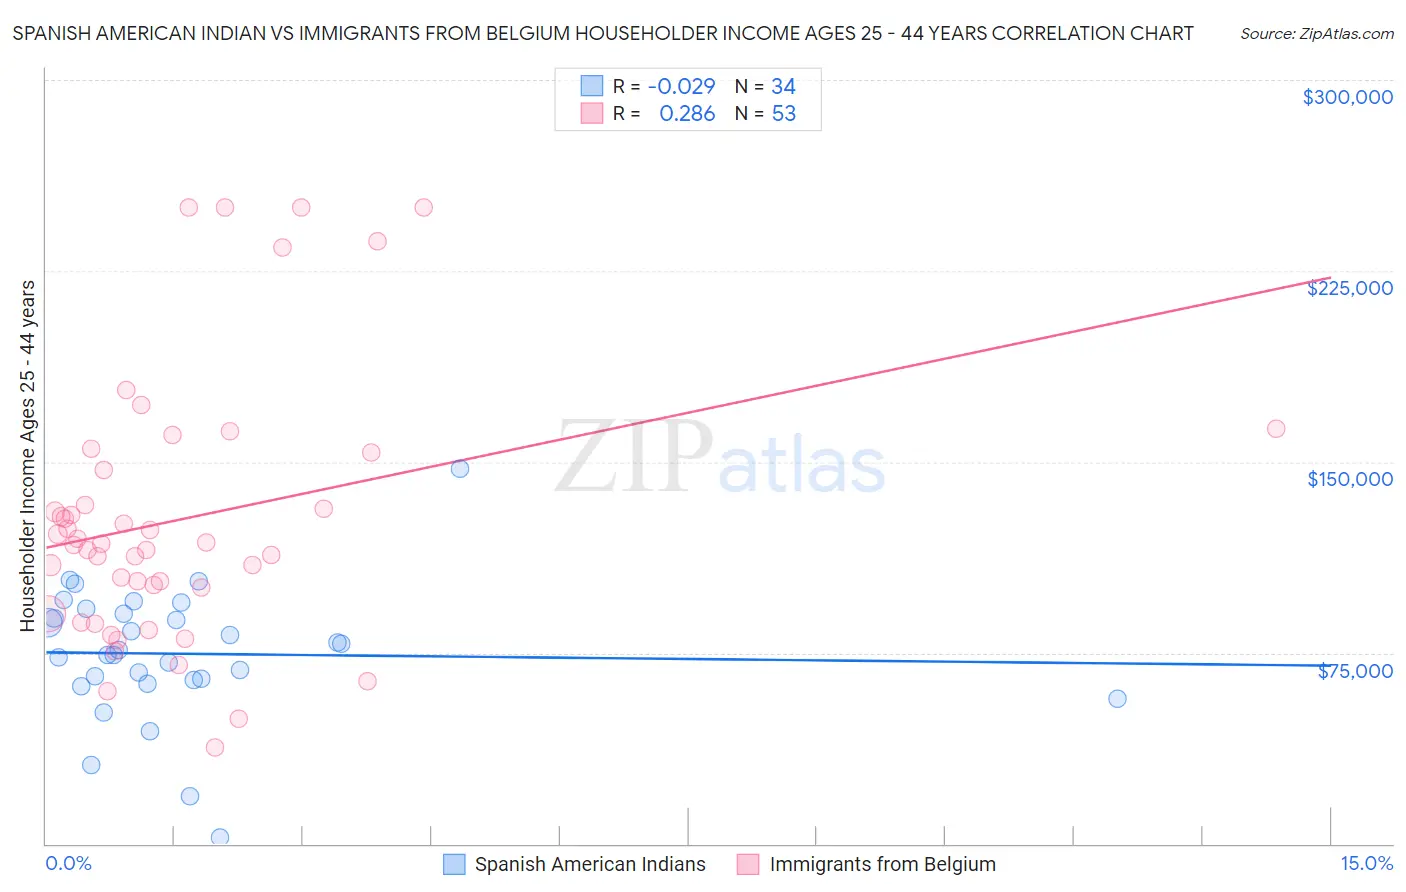 Spanish American Indian vs Immigrants from Belgium Householder Income Ages 25 - 44 years